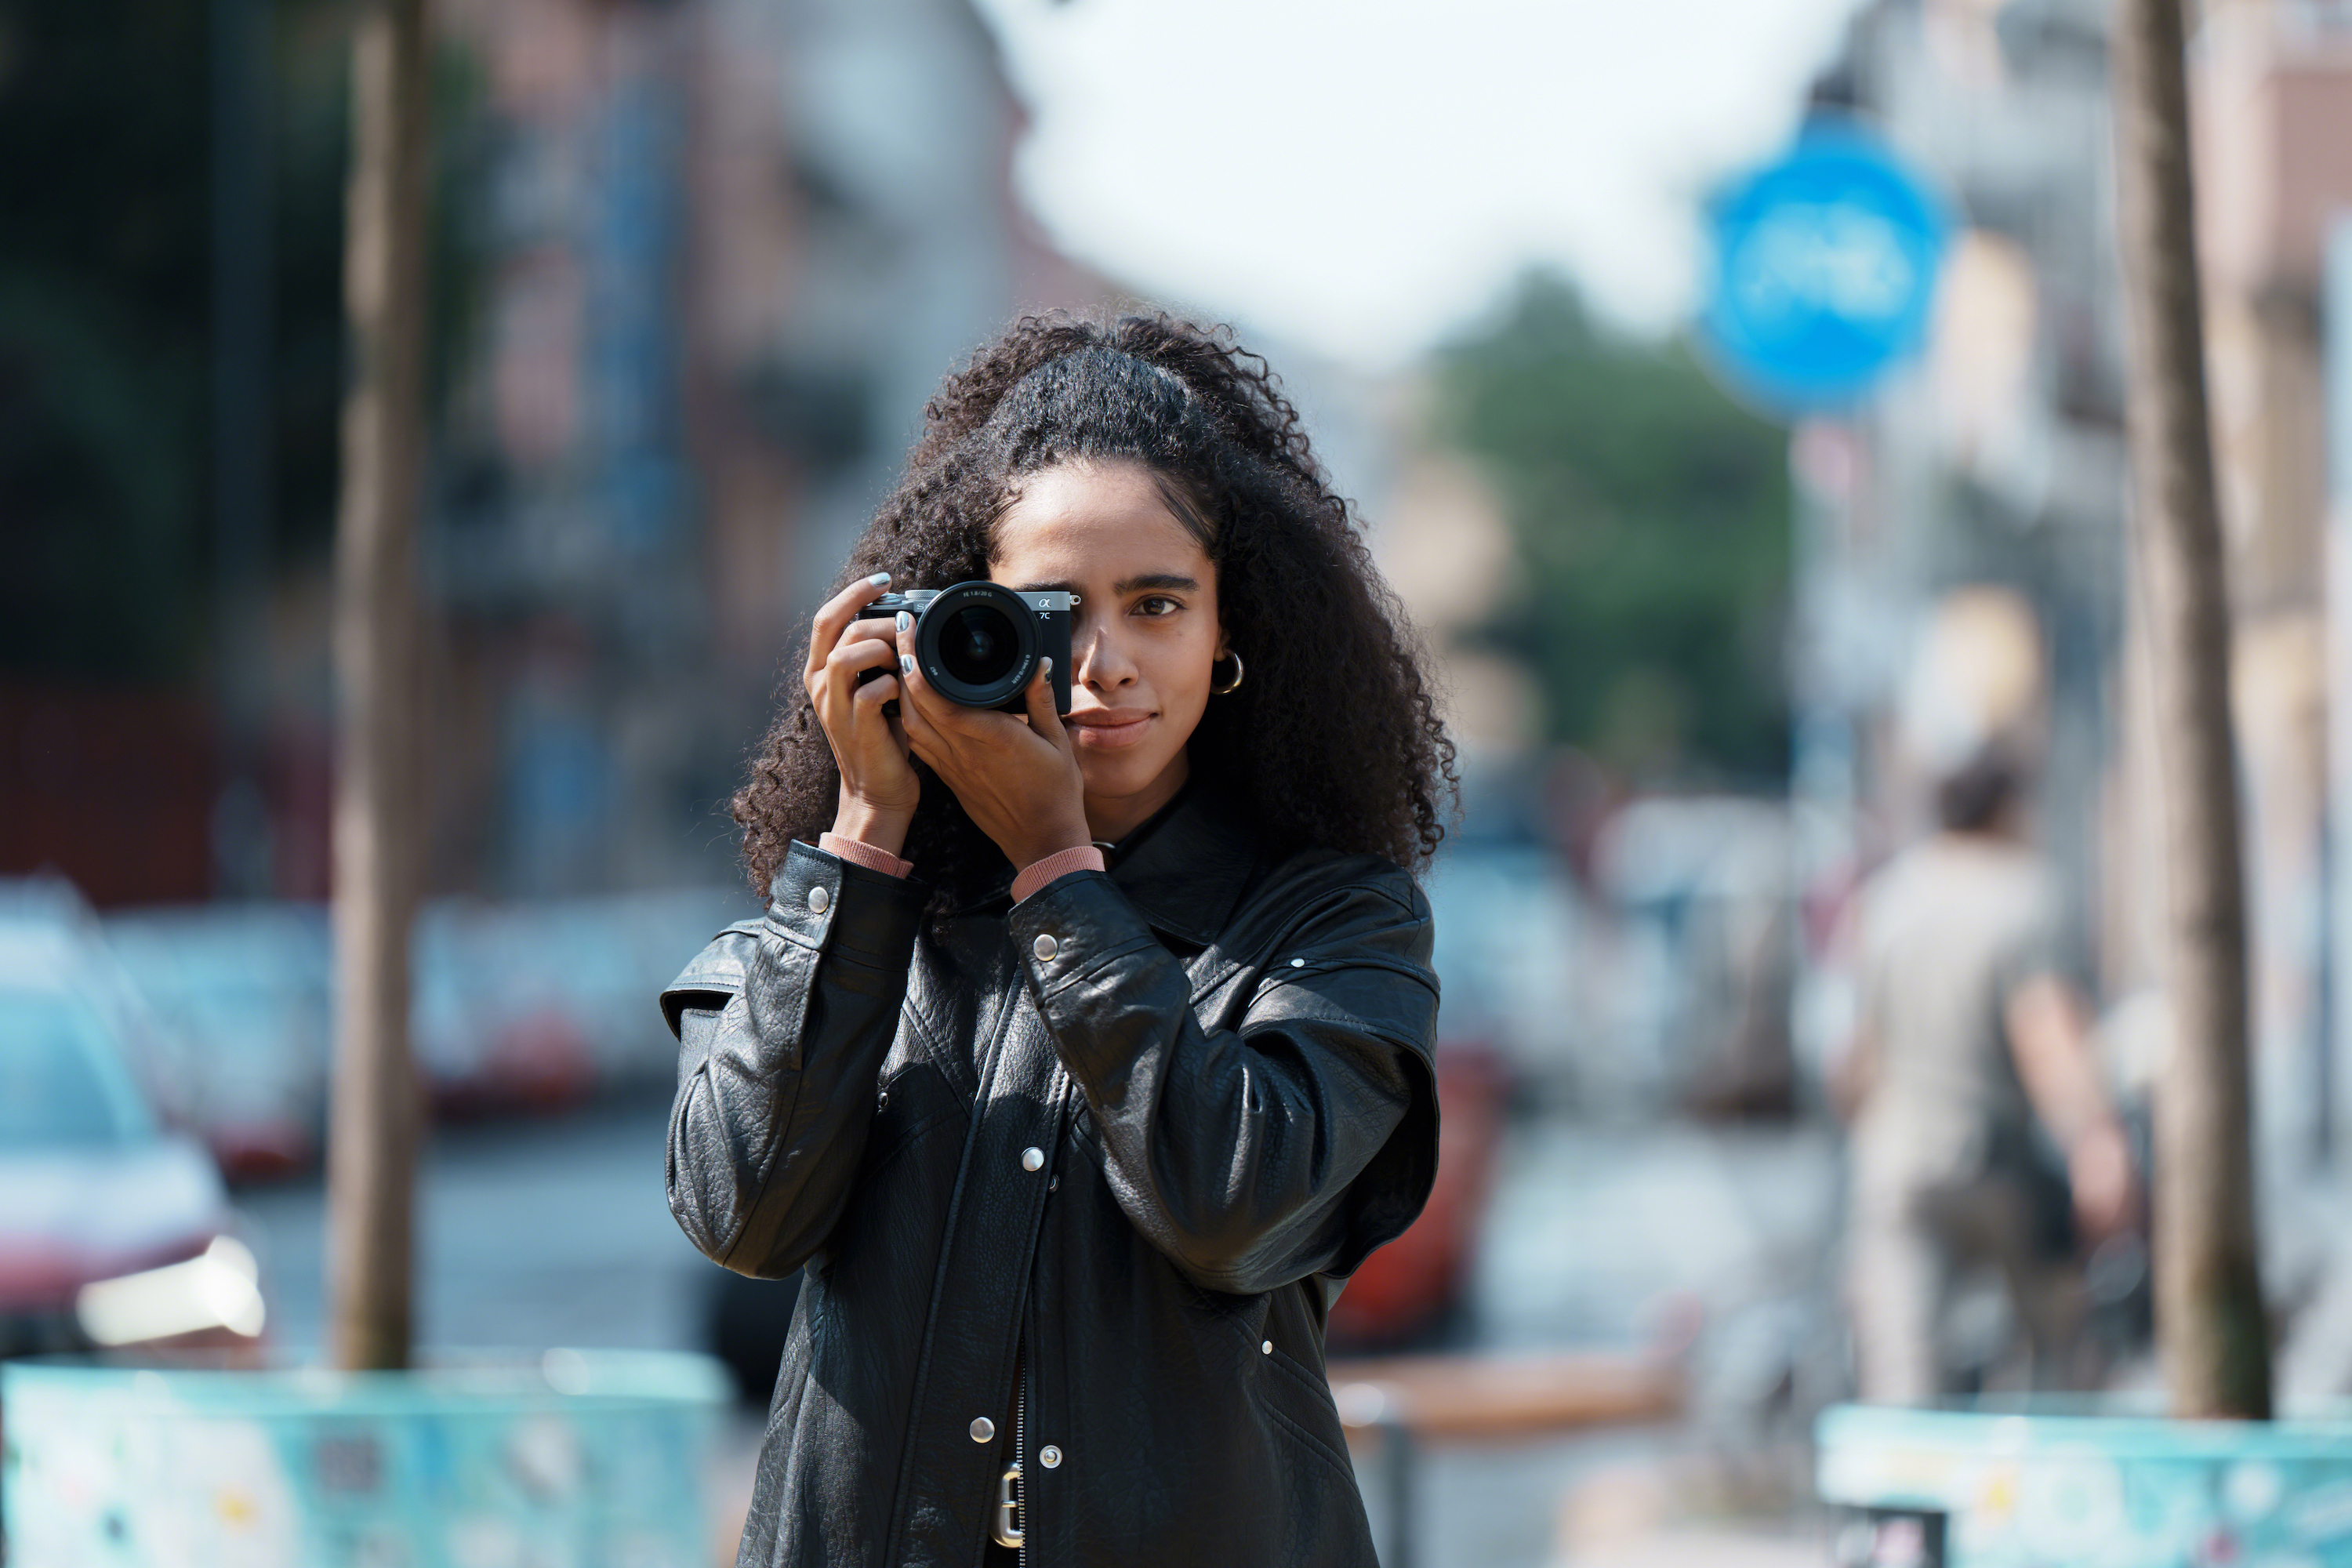 Frontal shot of a girl in a black leather jacket holding up a Sony Alpha 7C to capture a photo